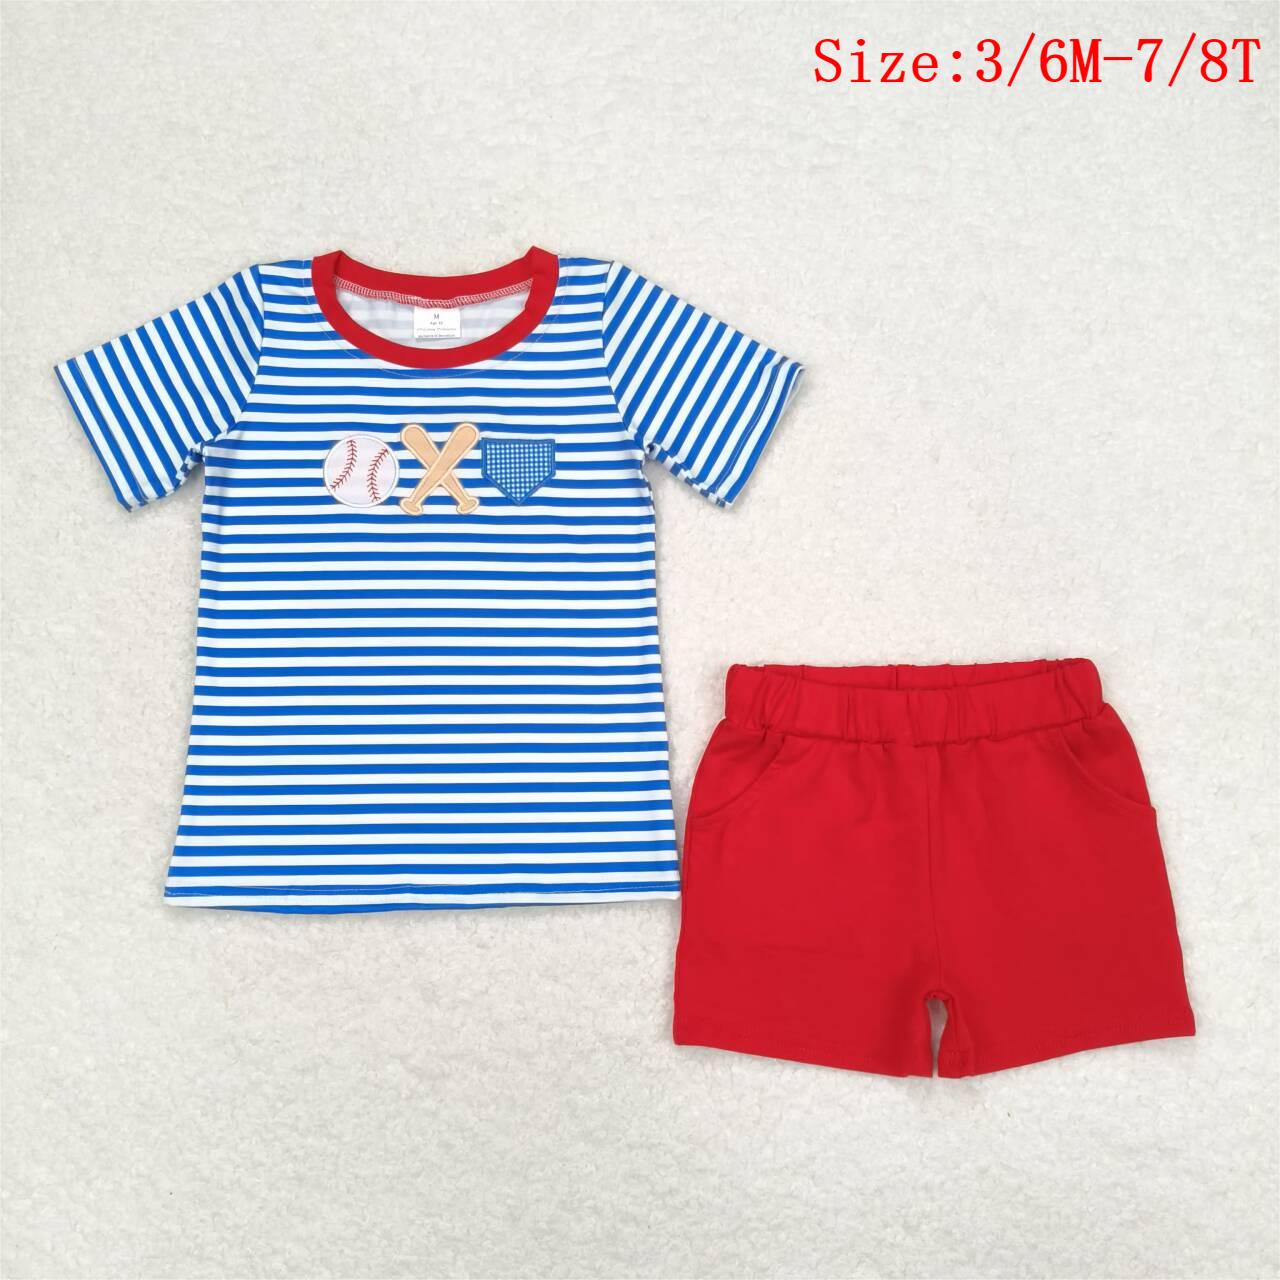 BSSO0844 Baseball Embroidery Print Top Red Shorts Boys Summer Clothes Set